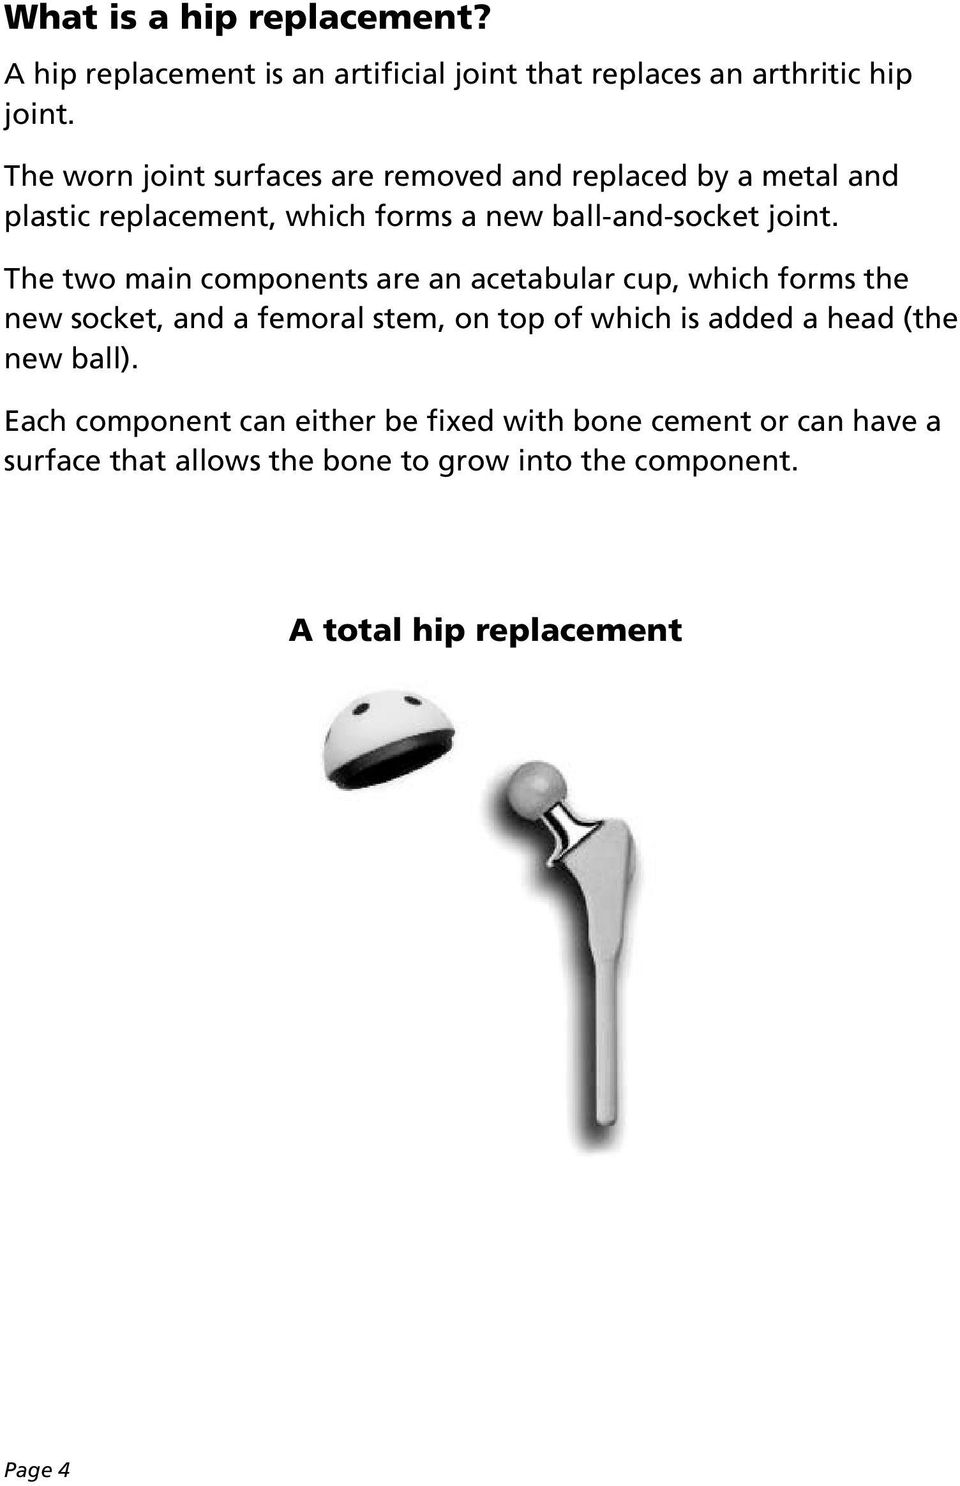 The two main components are an acetabular cup, which forms the new socket, and a femoral stem, on top of which is added a head